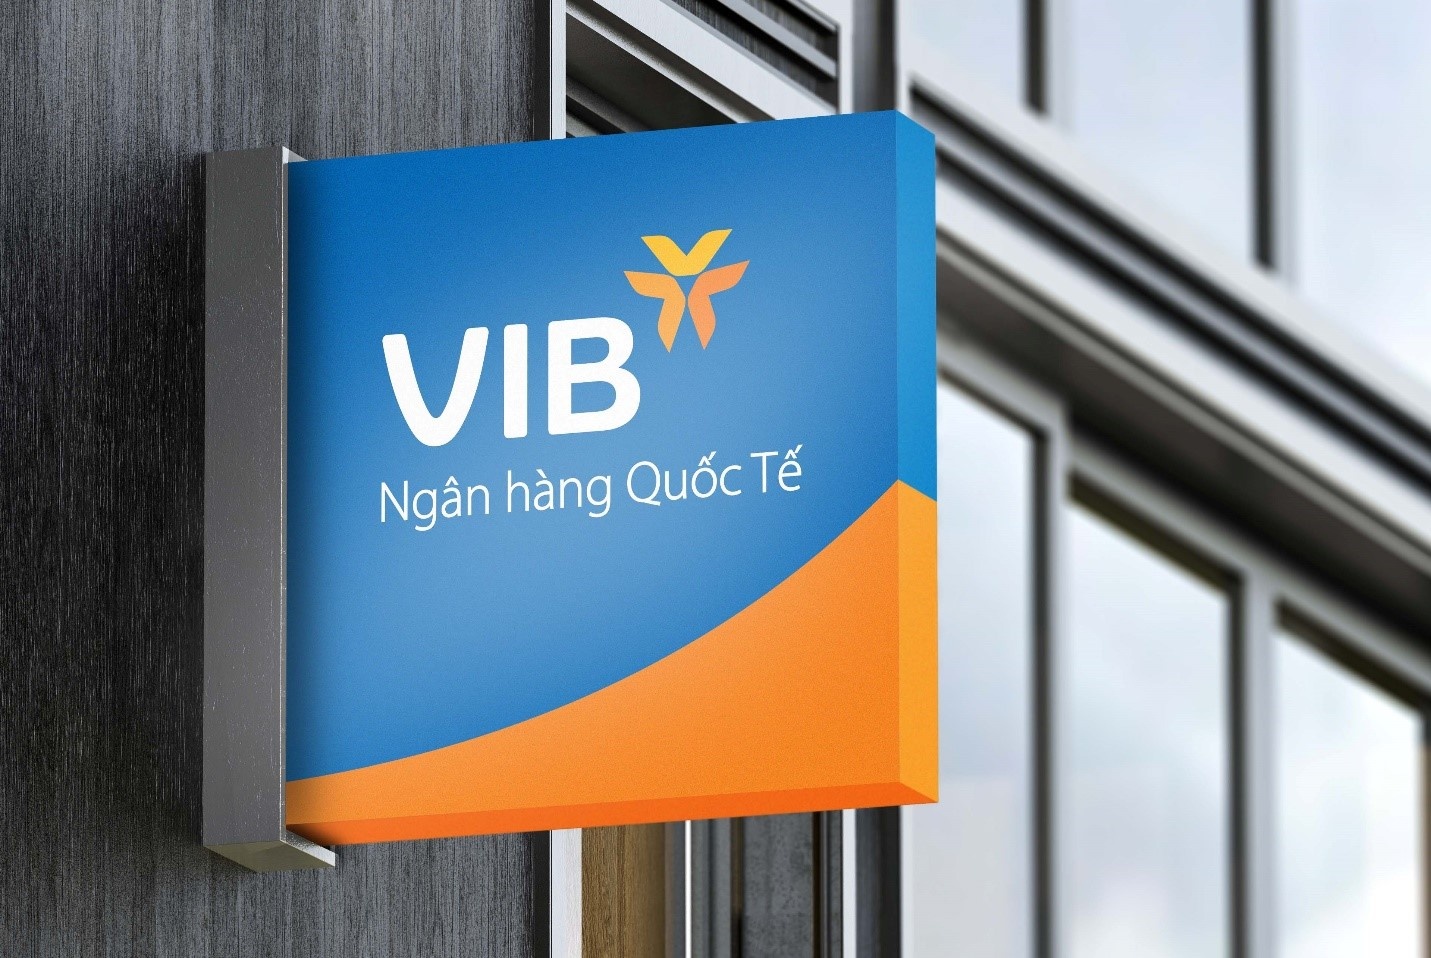 VIB plans paying 35 per cent in dividends in 2022